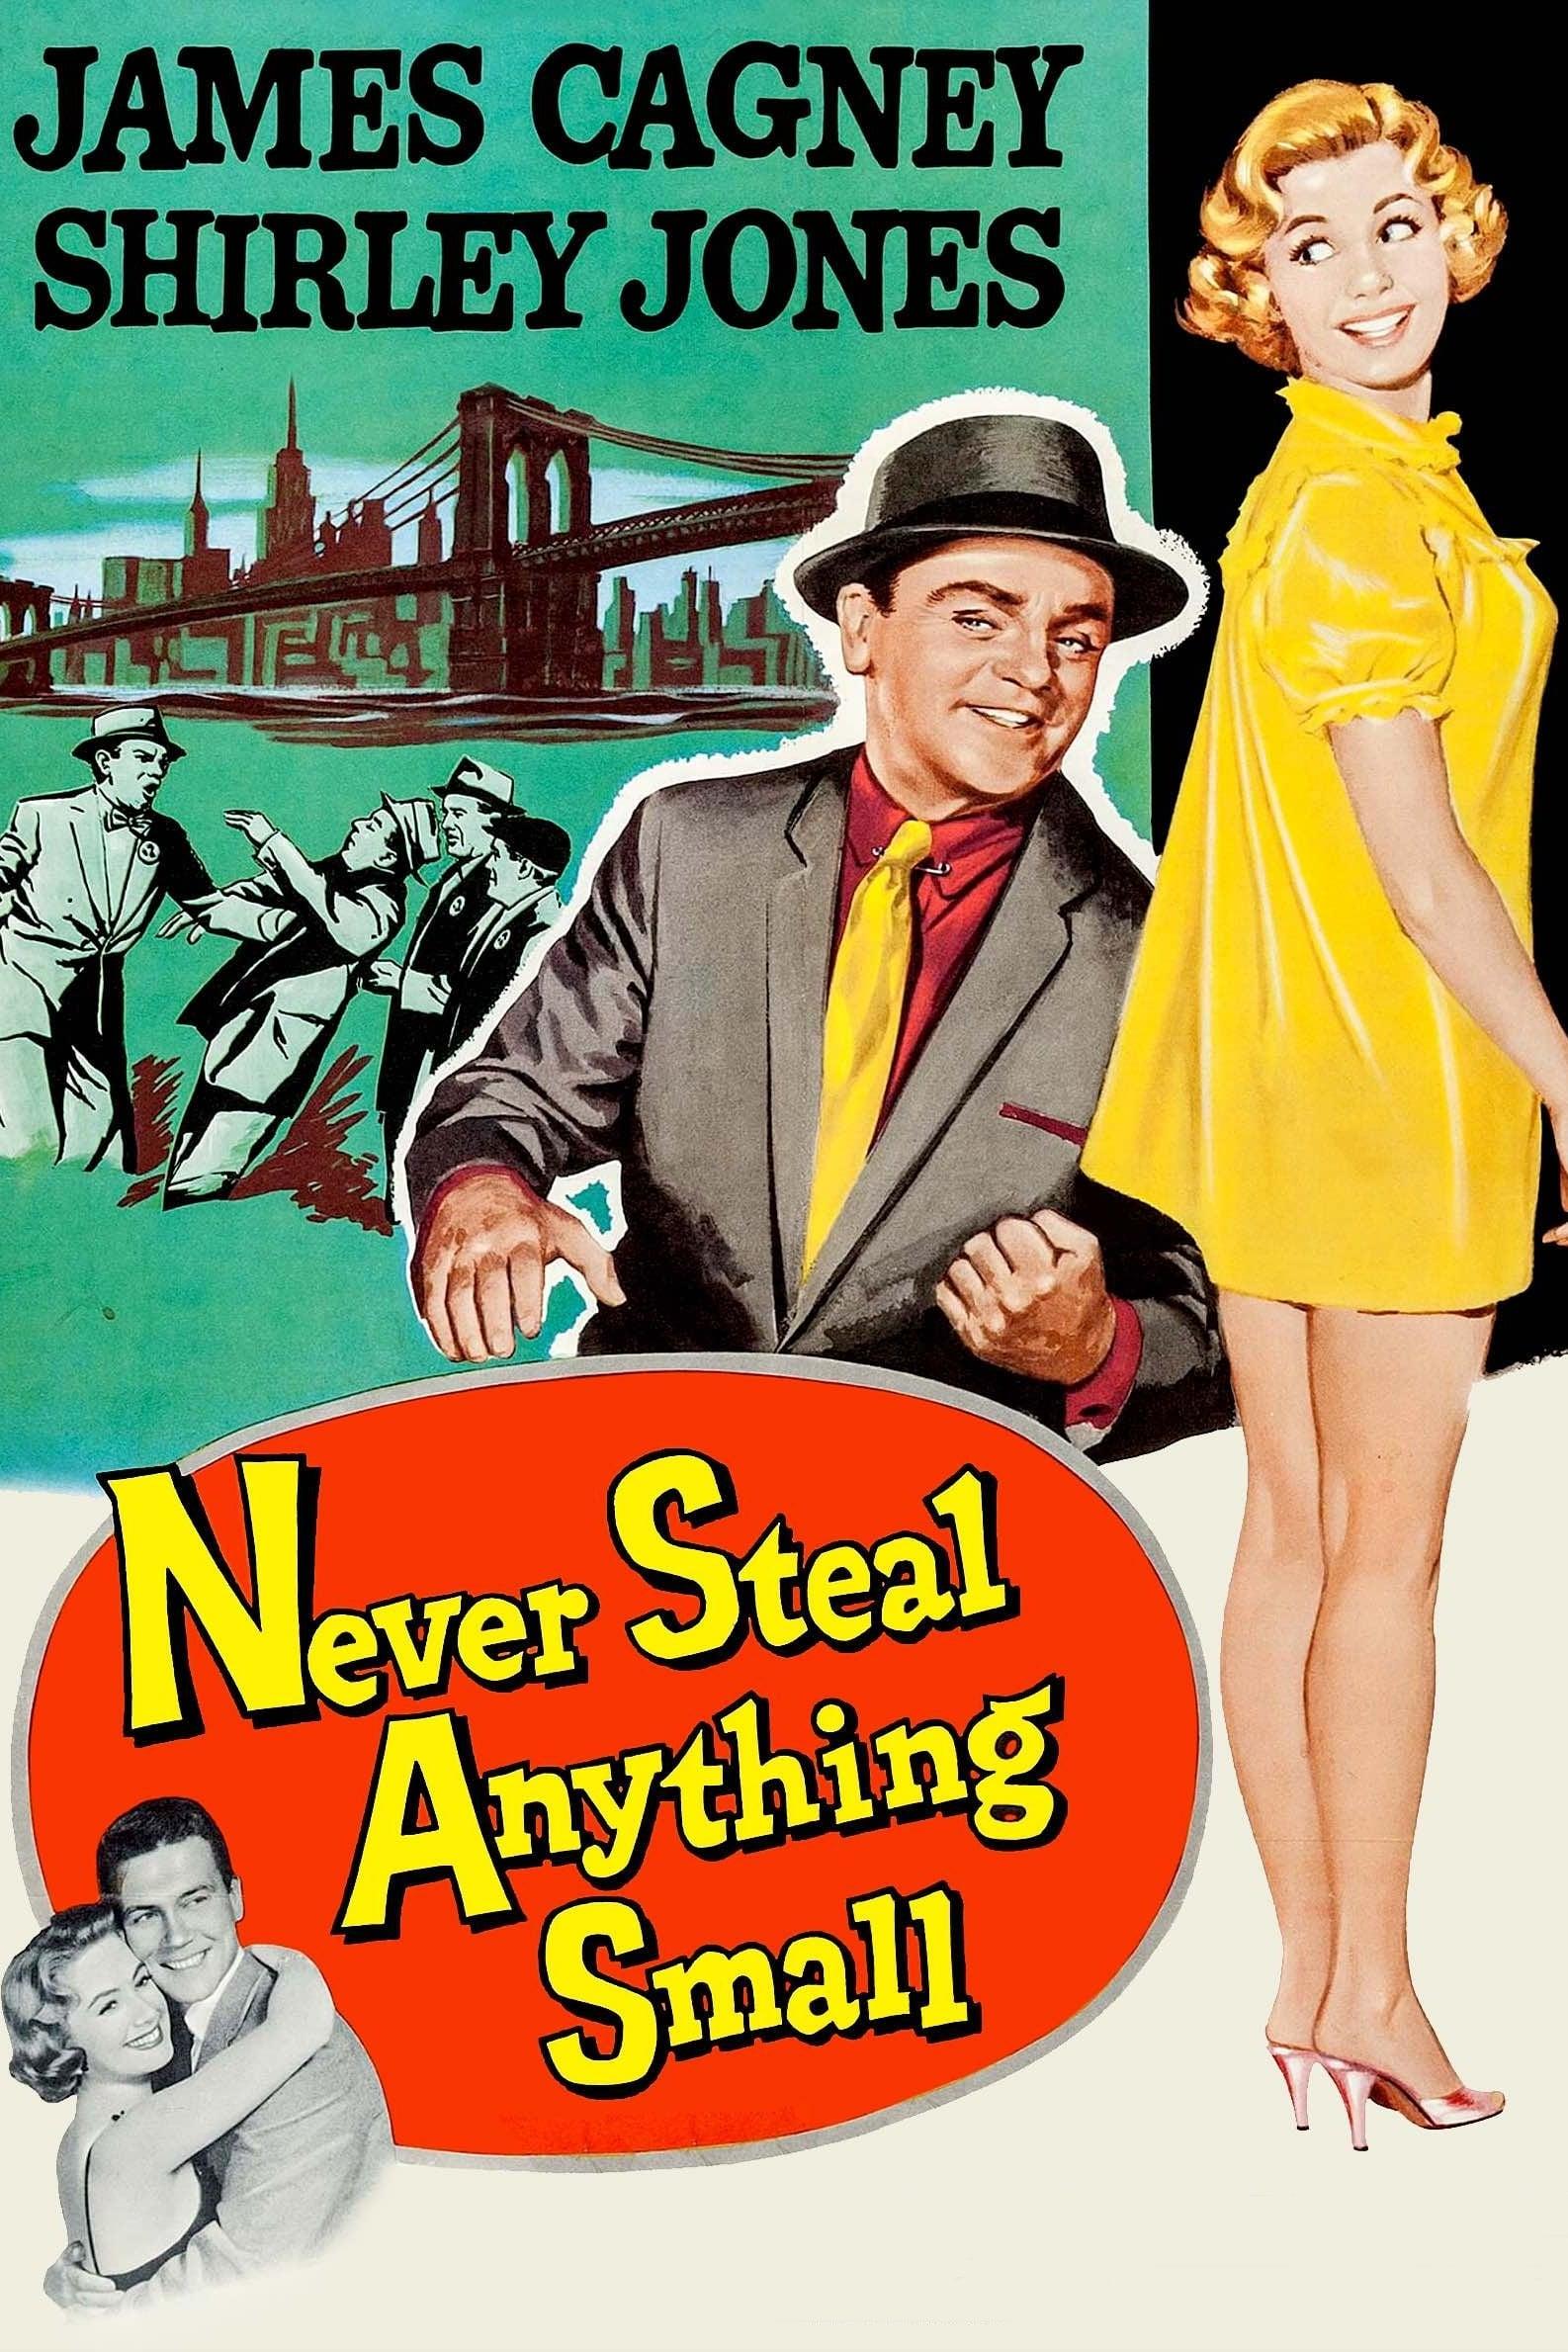 Never Steal Anything Small poster